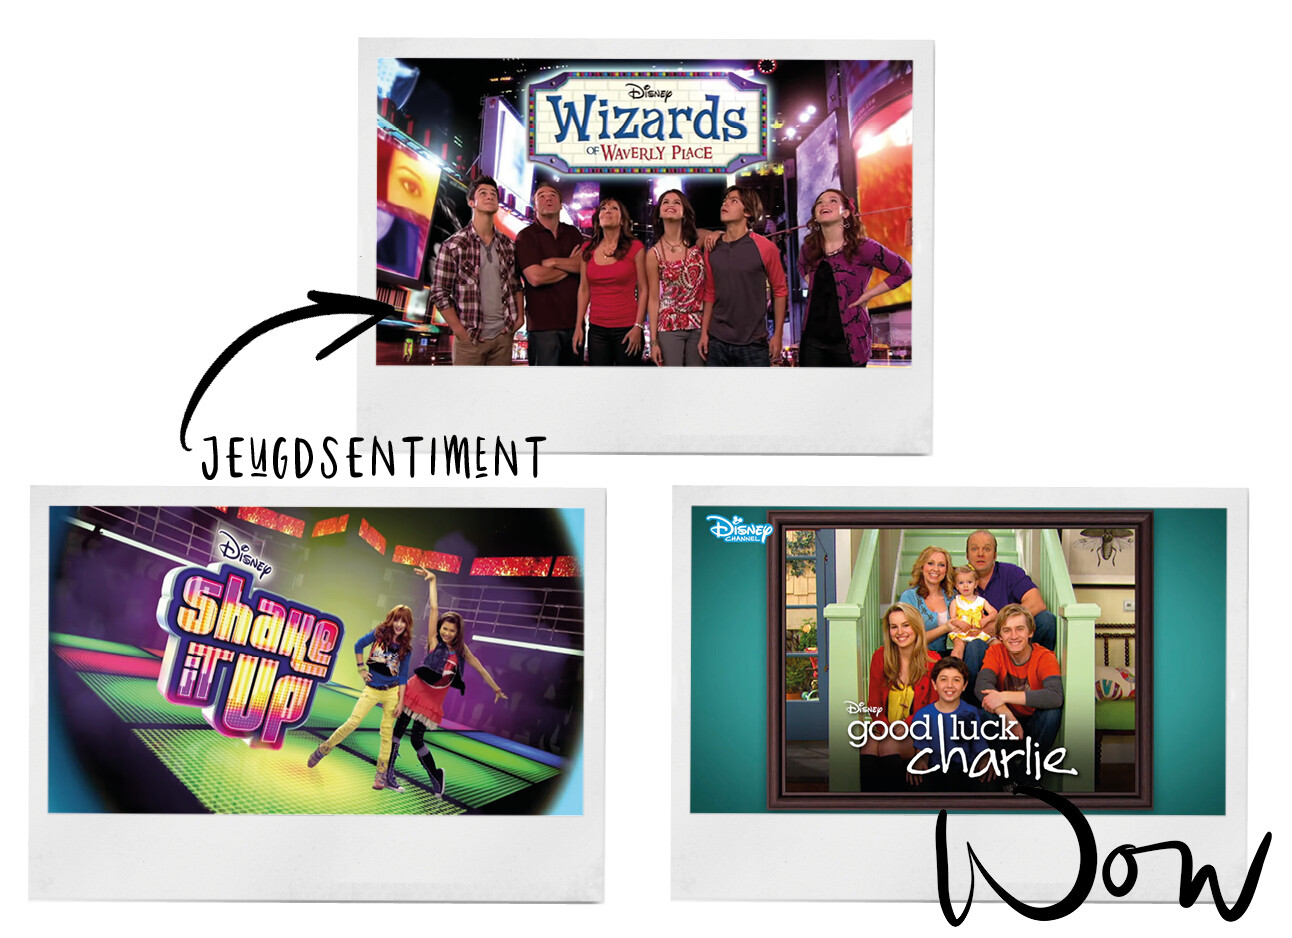 disnet channel series, shake it up, wizard of waverly place en good luck charlie